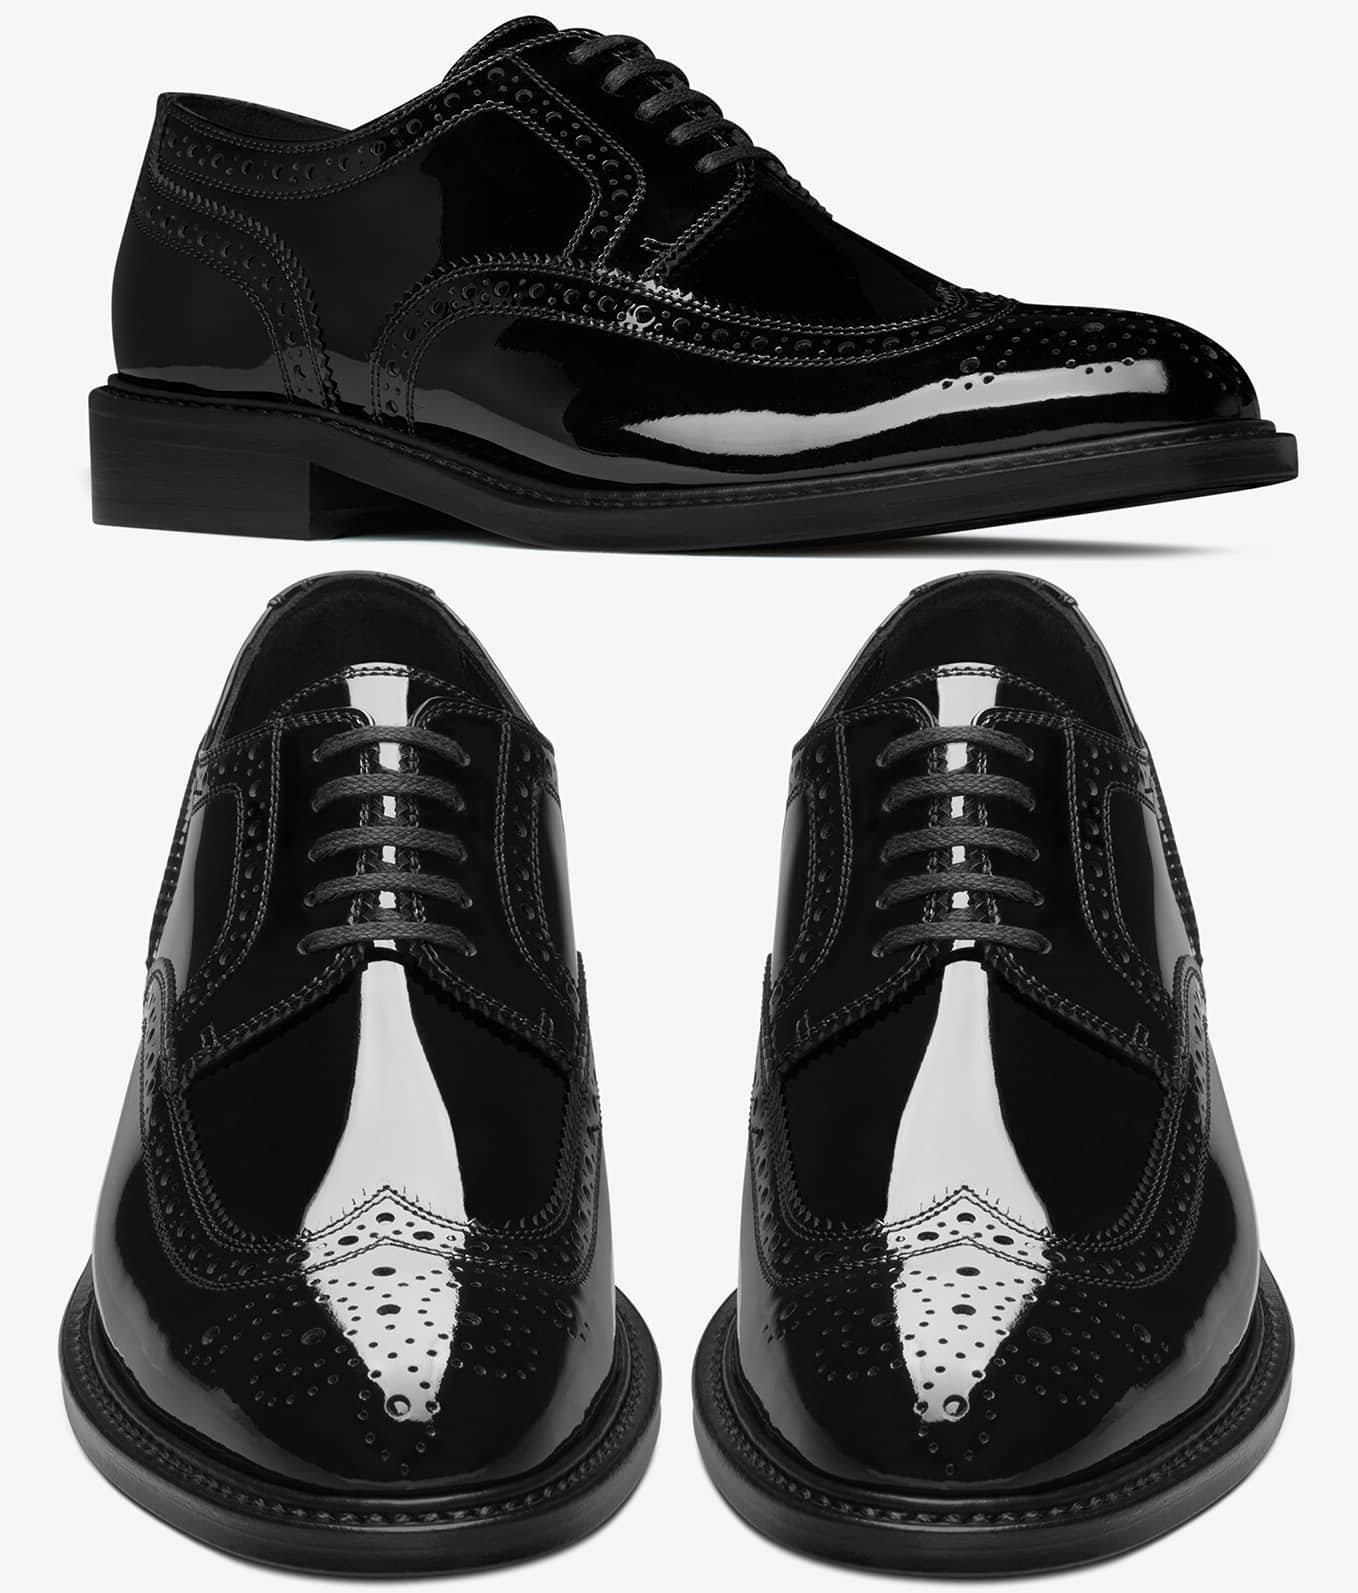 These laced derbies from Saint Laurent are decorated with perforated detailing, finished with lace-up upper and 0.7-inch heels